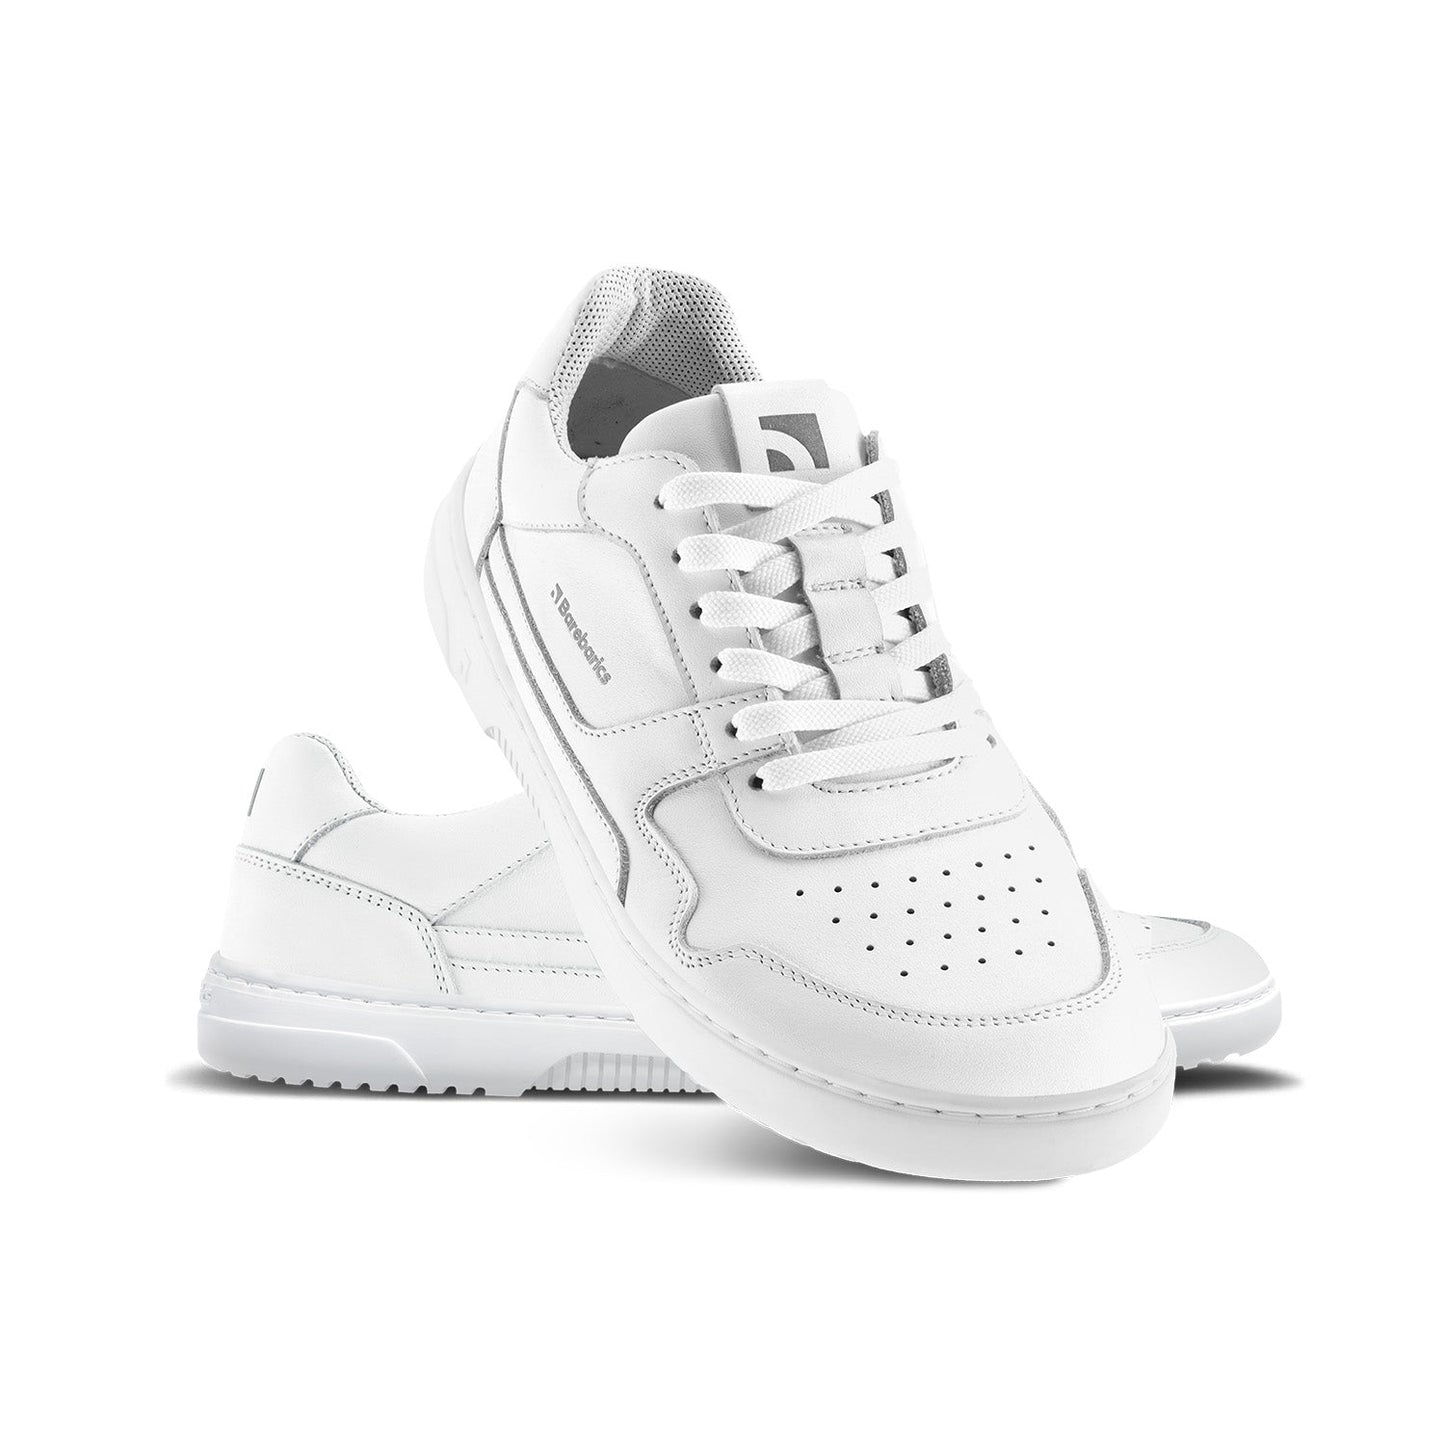 Barefoot Sneakers Barebarics Zing - All White - Leather